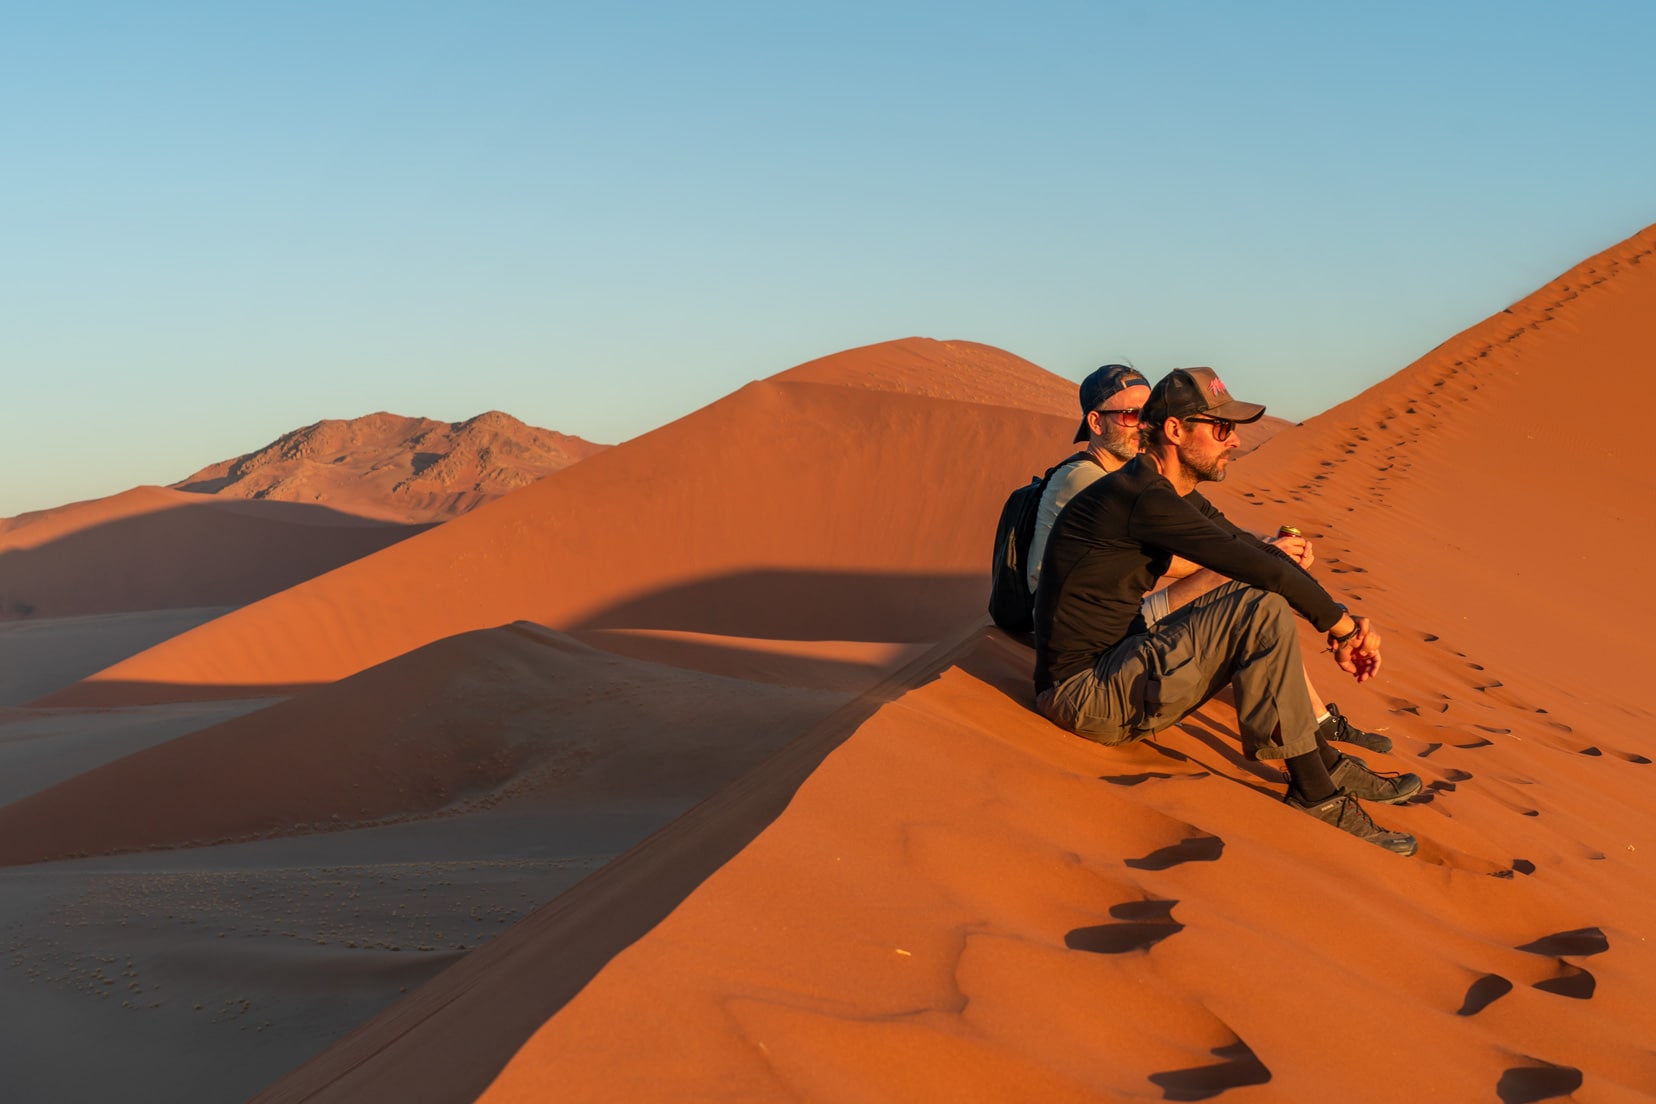 Dune-45-at-sunset-with-2-guys-sitting-on-the-dune-spine,-Sossusvlei